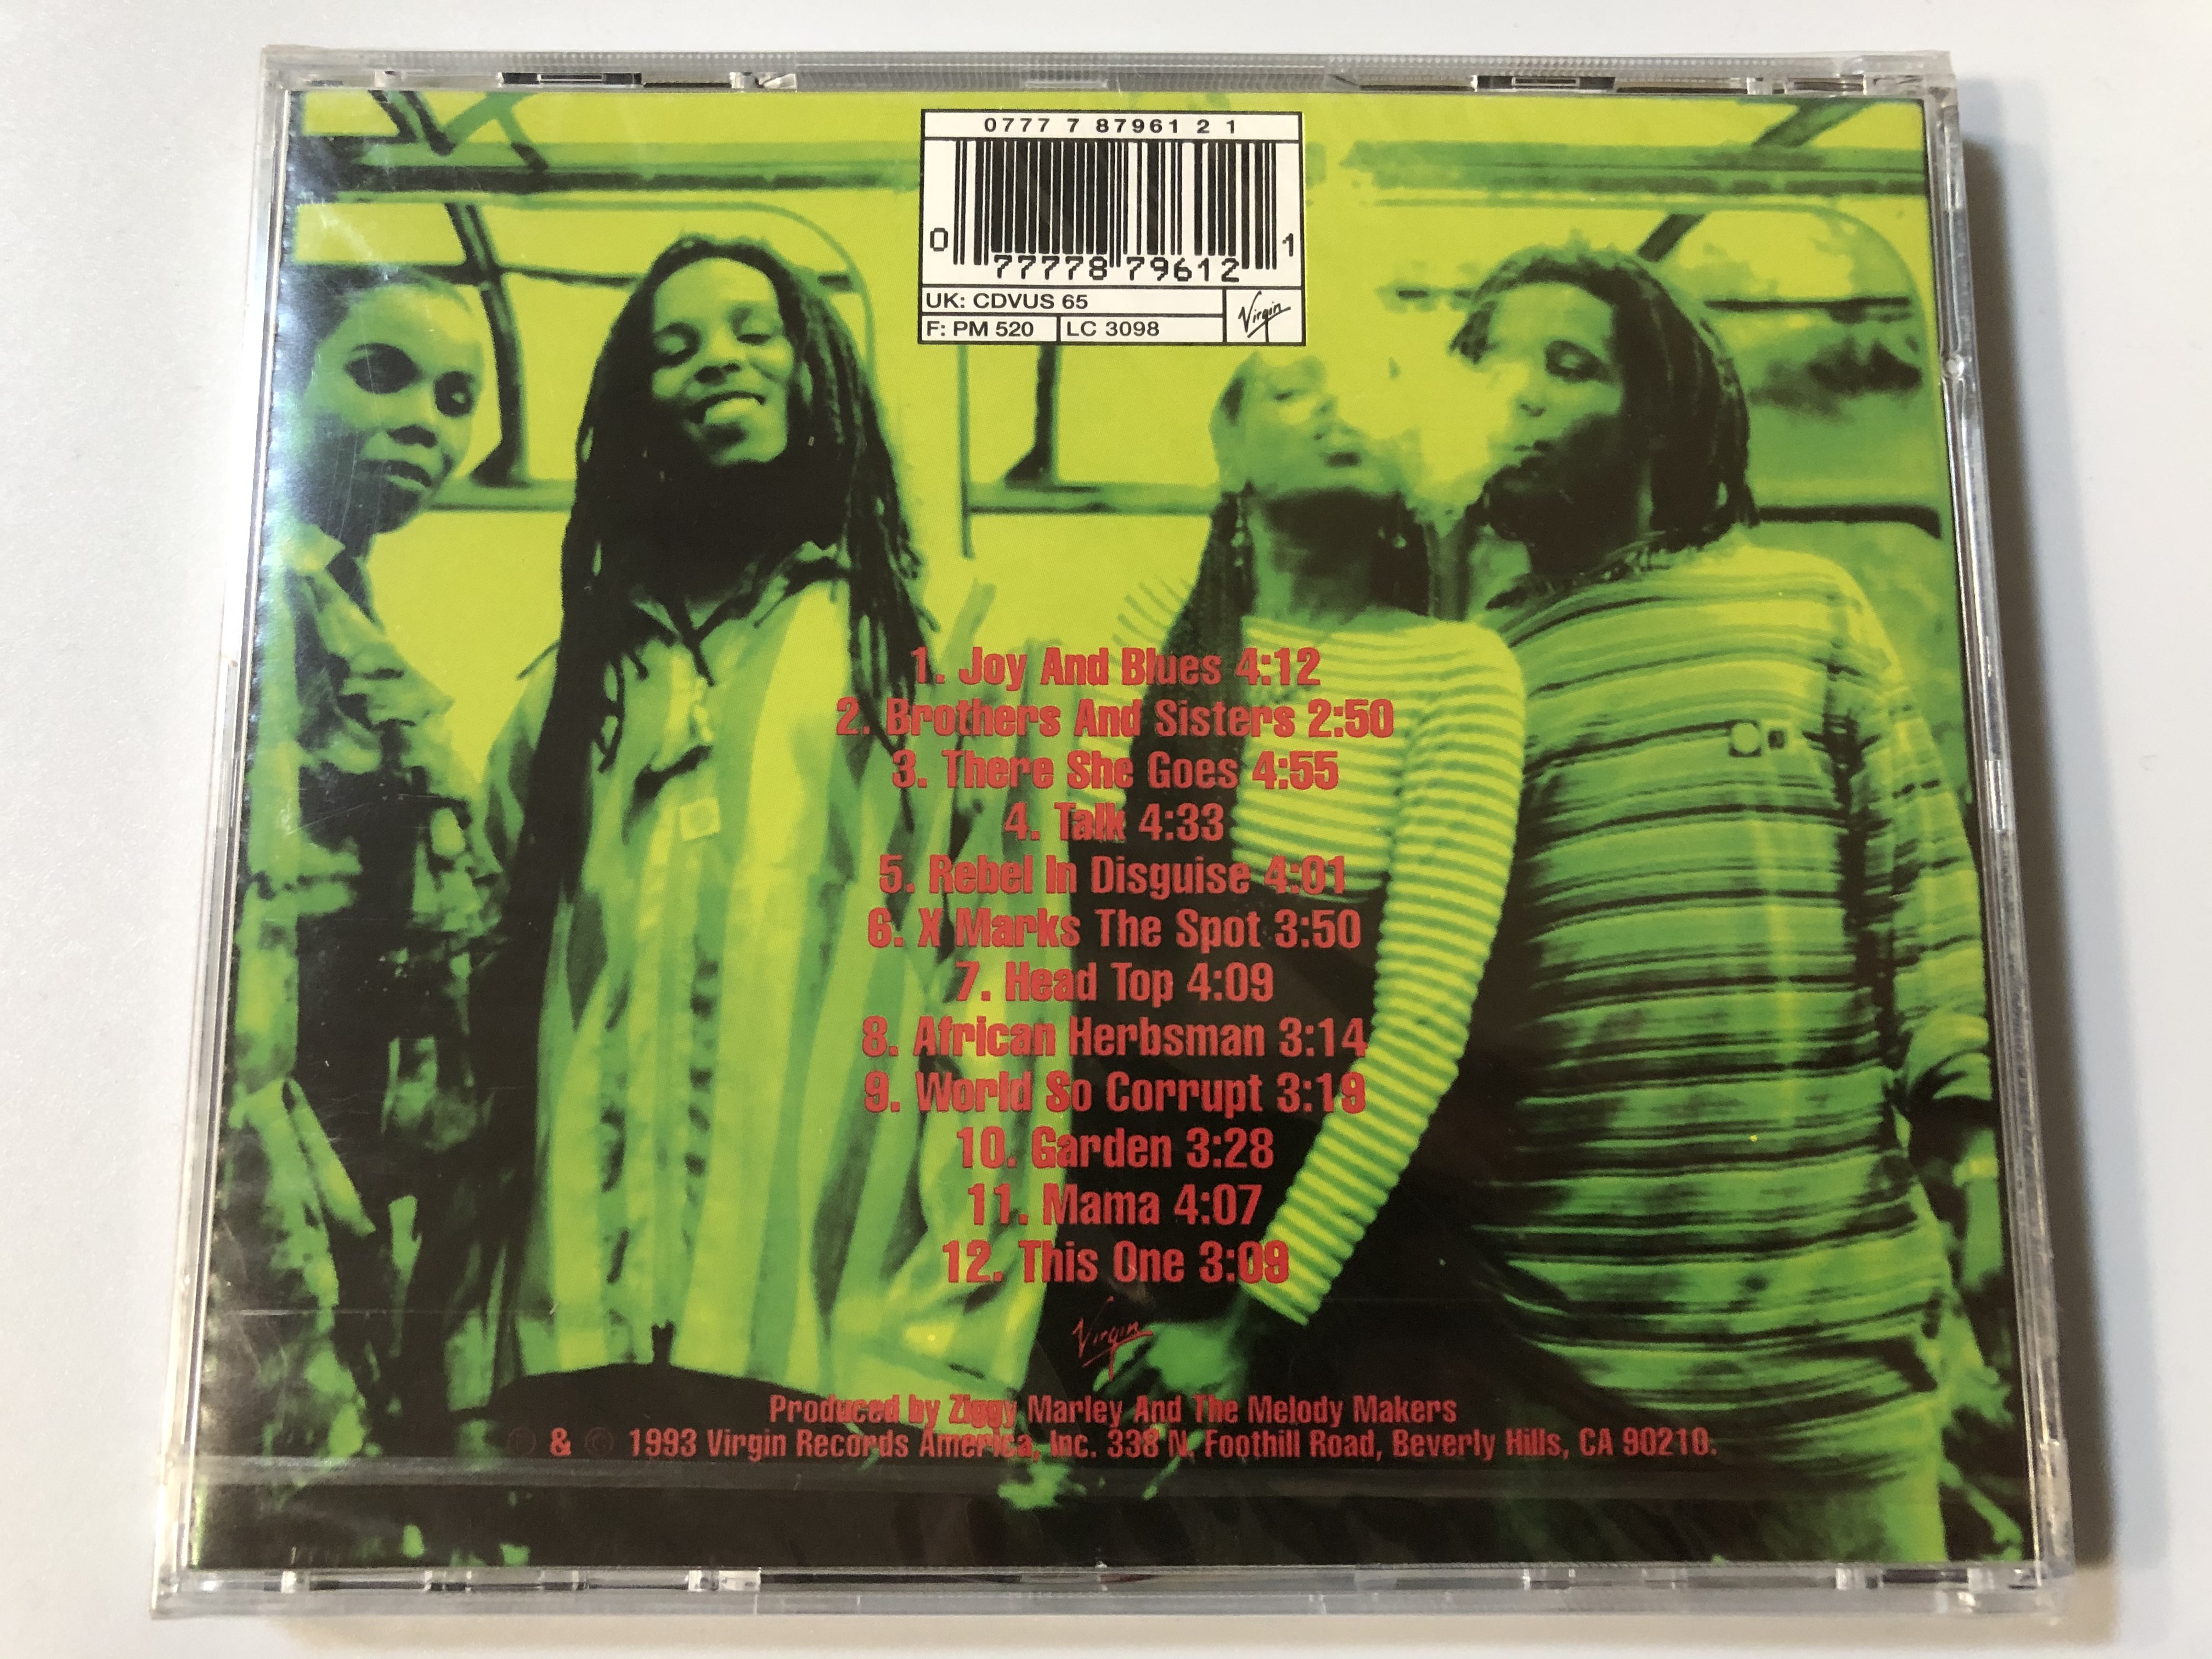 ziggy-marley-and-the-melody-makers-joy-and-blues-virgin-audio-cd-1993-cdvus-65-2-.jpg